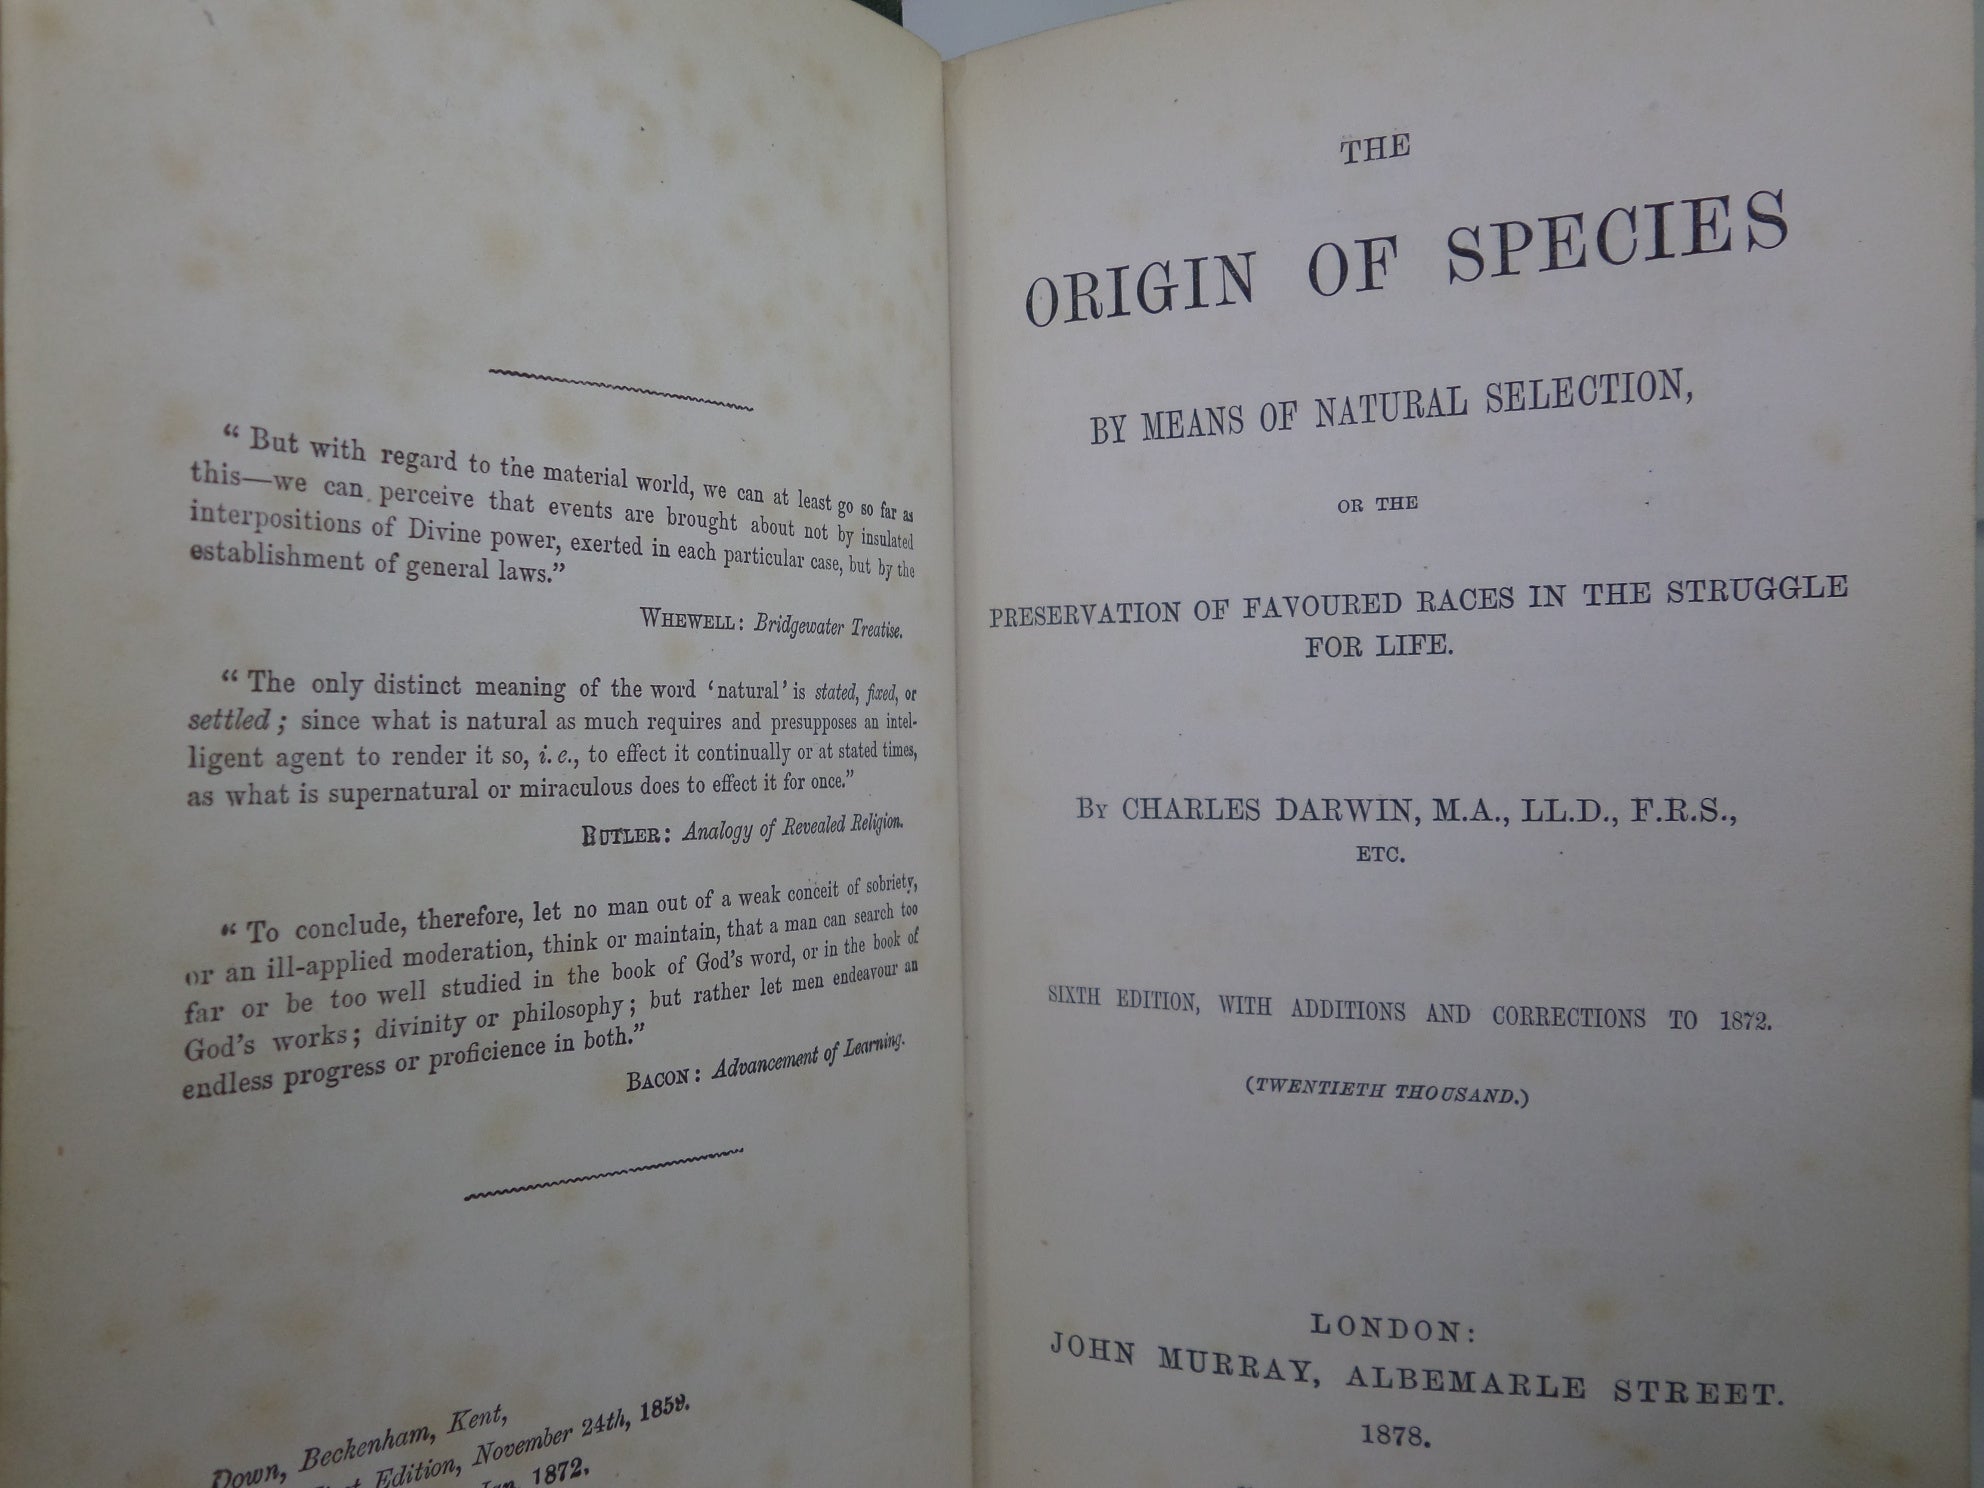 THE ORIGIN OF SPECIES BY MEANS OF NATURAL SELECTION 1878 CHARLES DARWIN